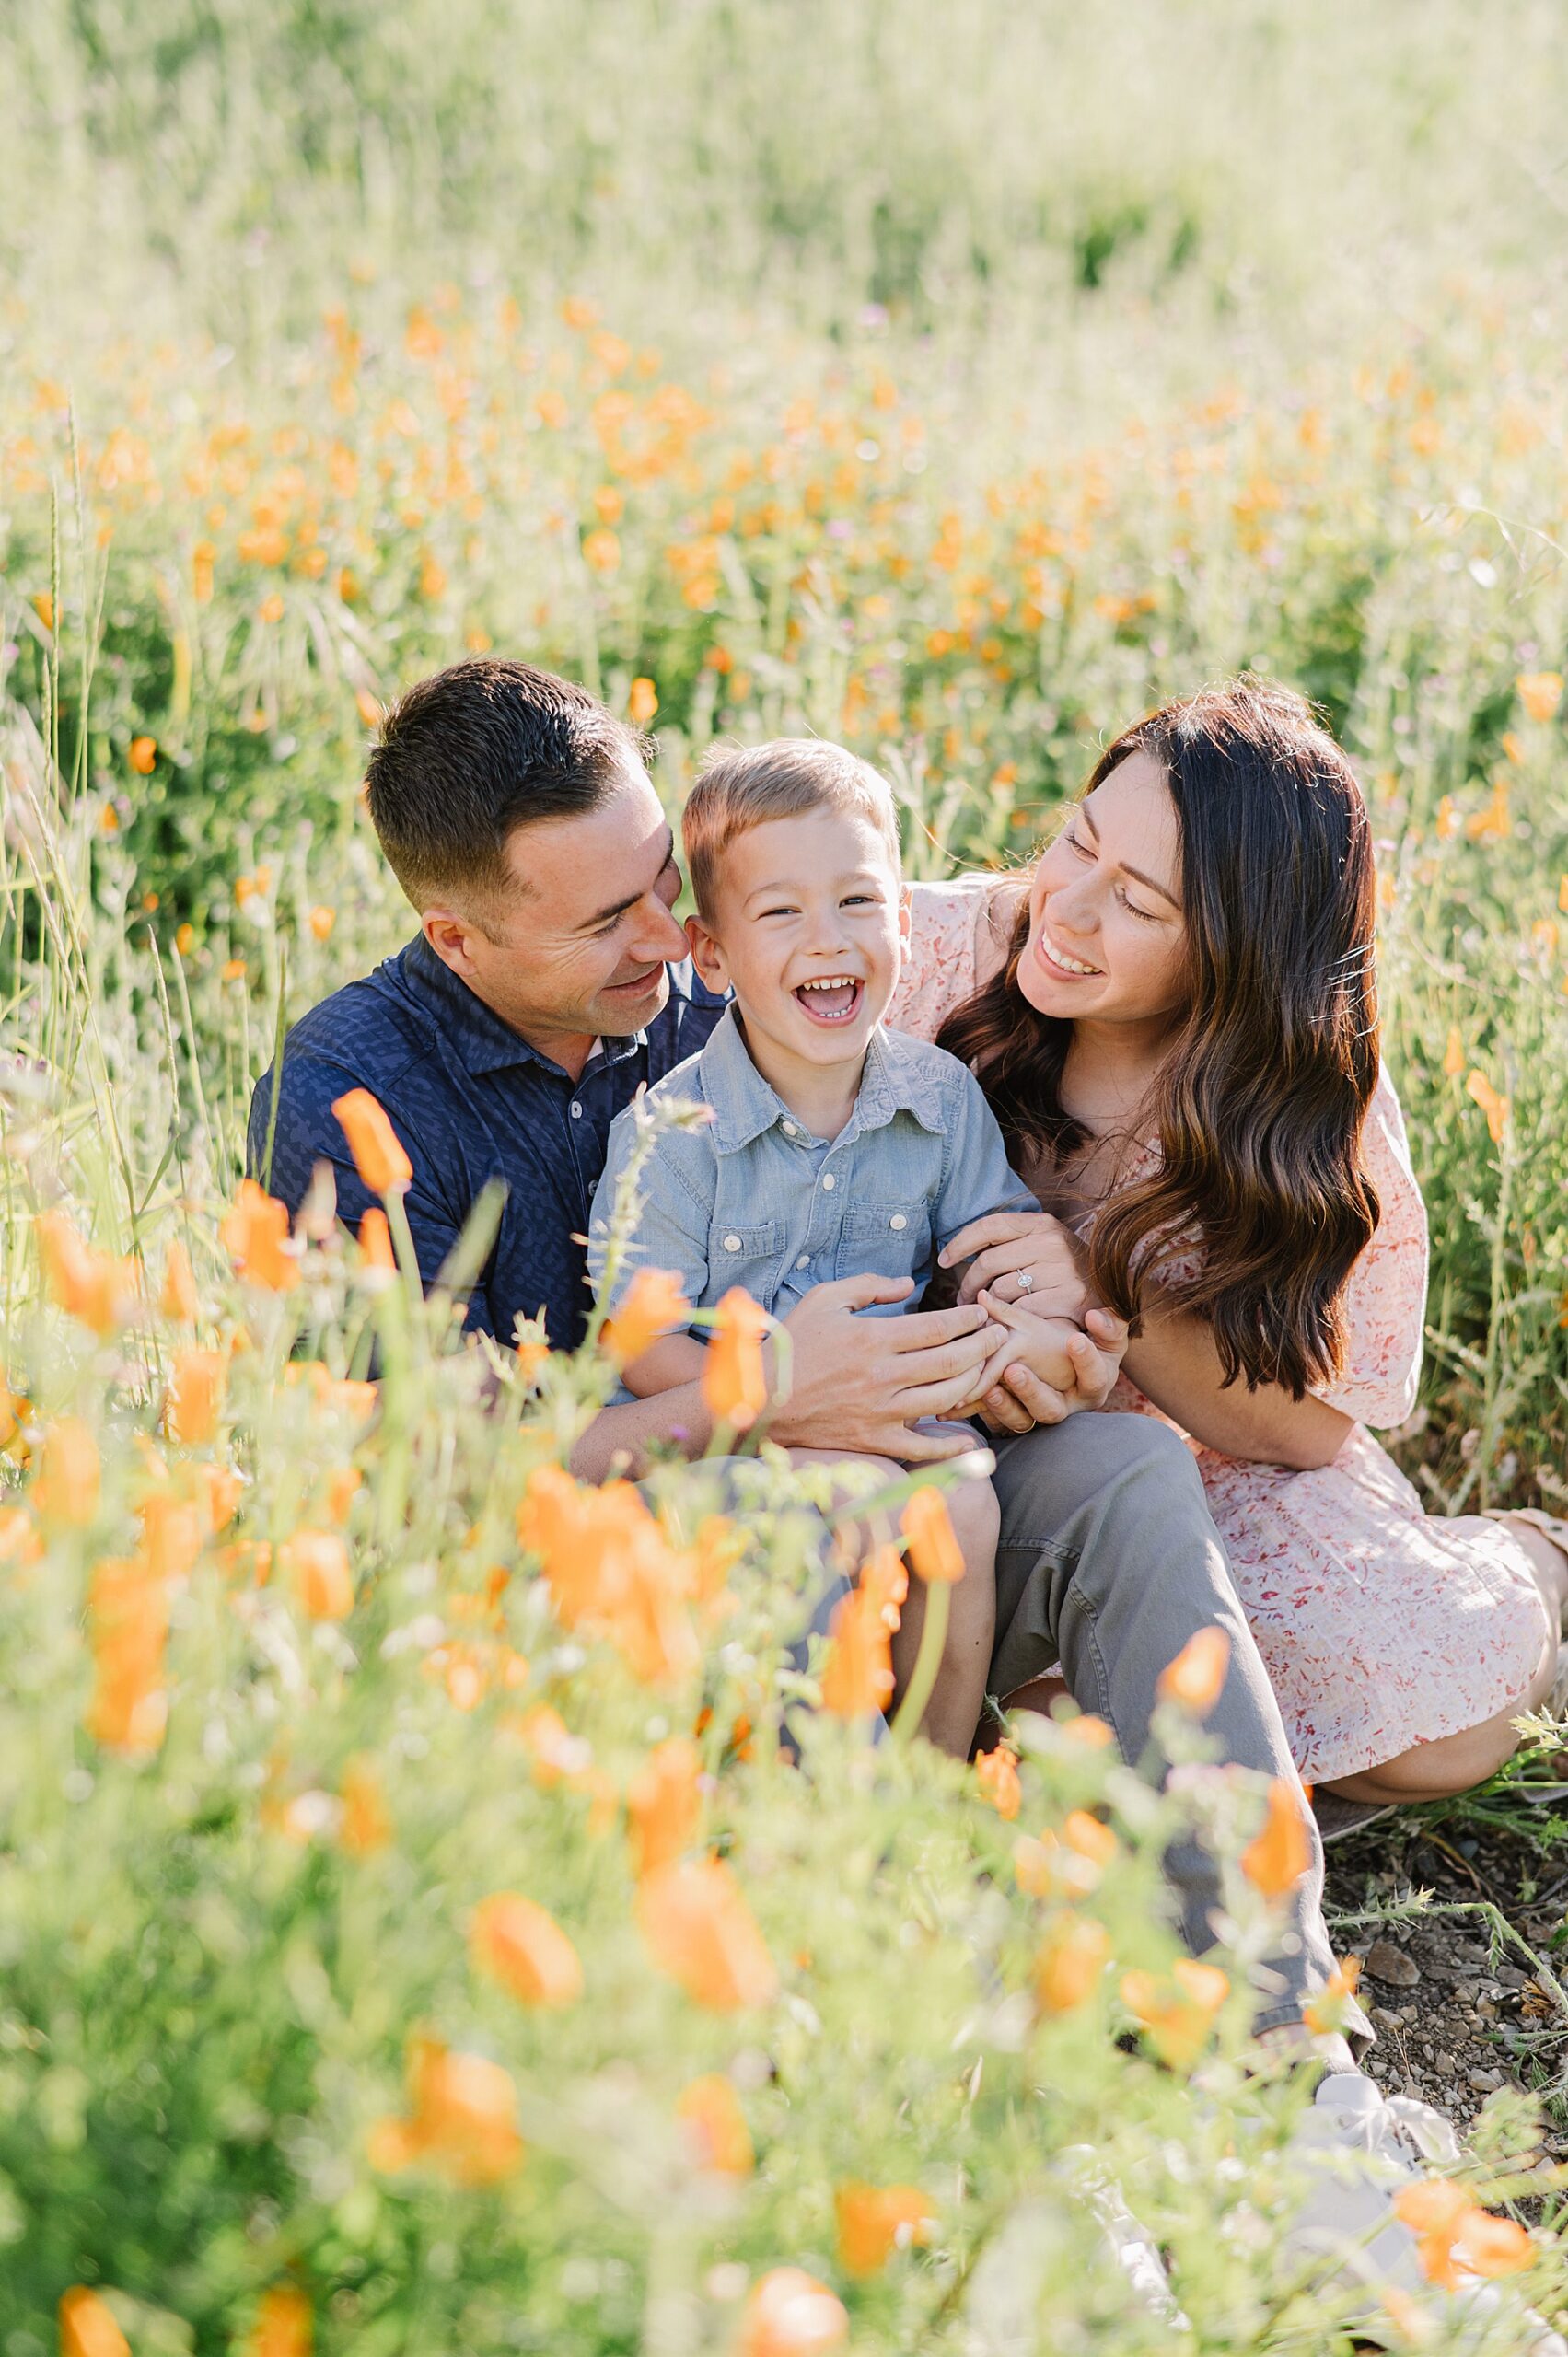 NIkkels Photography, a california-based photographer, shares five tips for preparing kids for photoshoots.